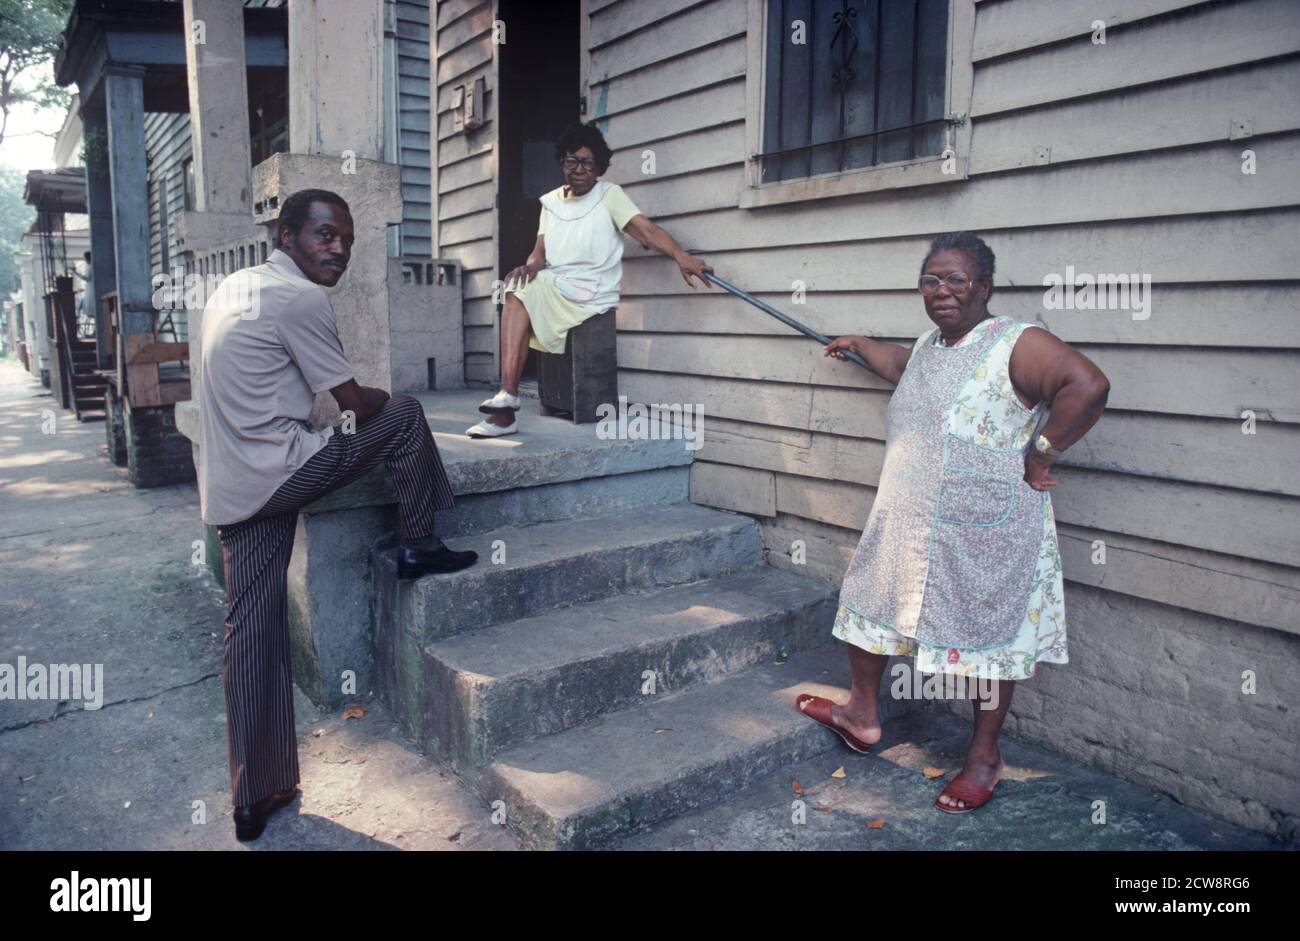 AFRICAN AMERICANS IN DOWNTOWN SAVANNAH, GEORGIA, USA, 1980s Stock Photo